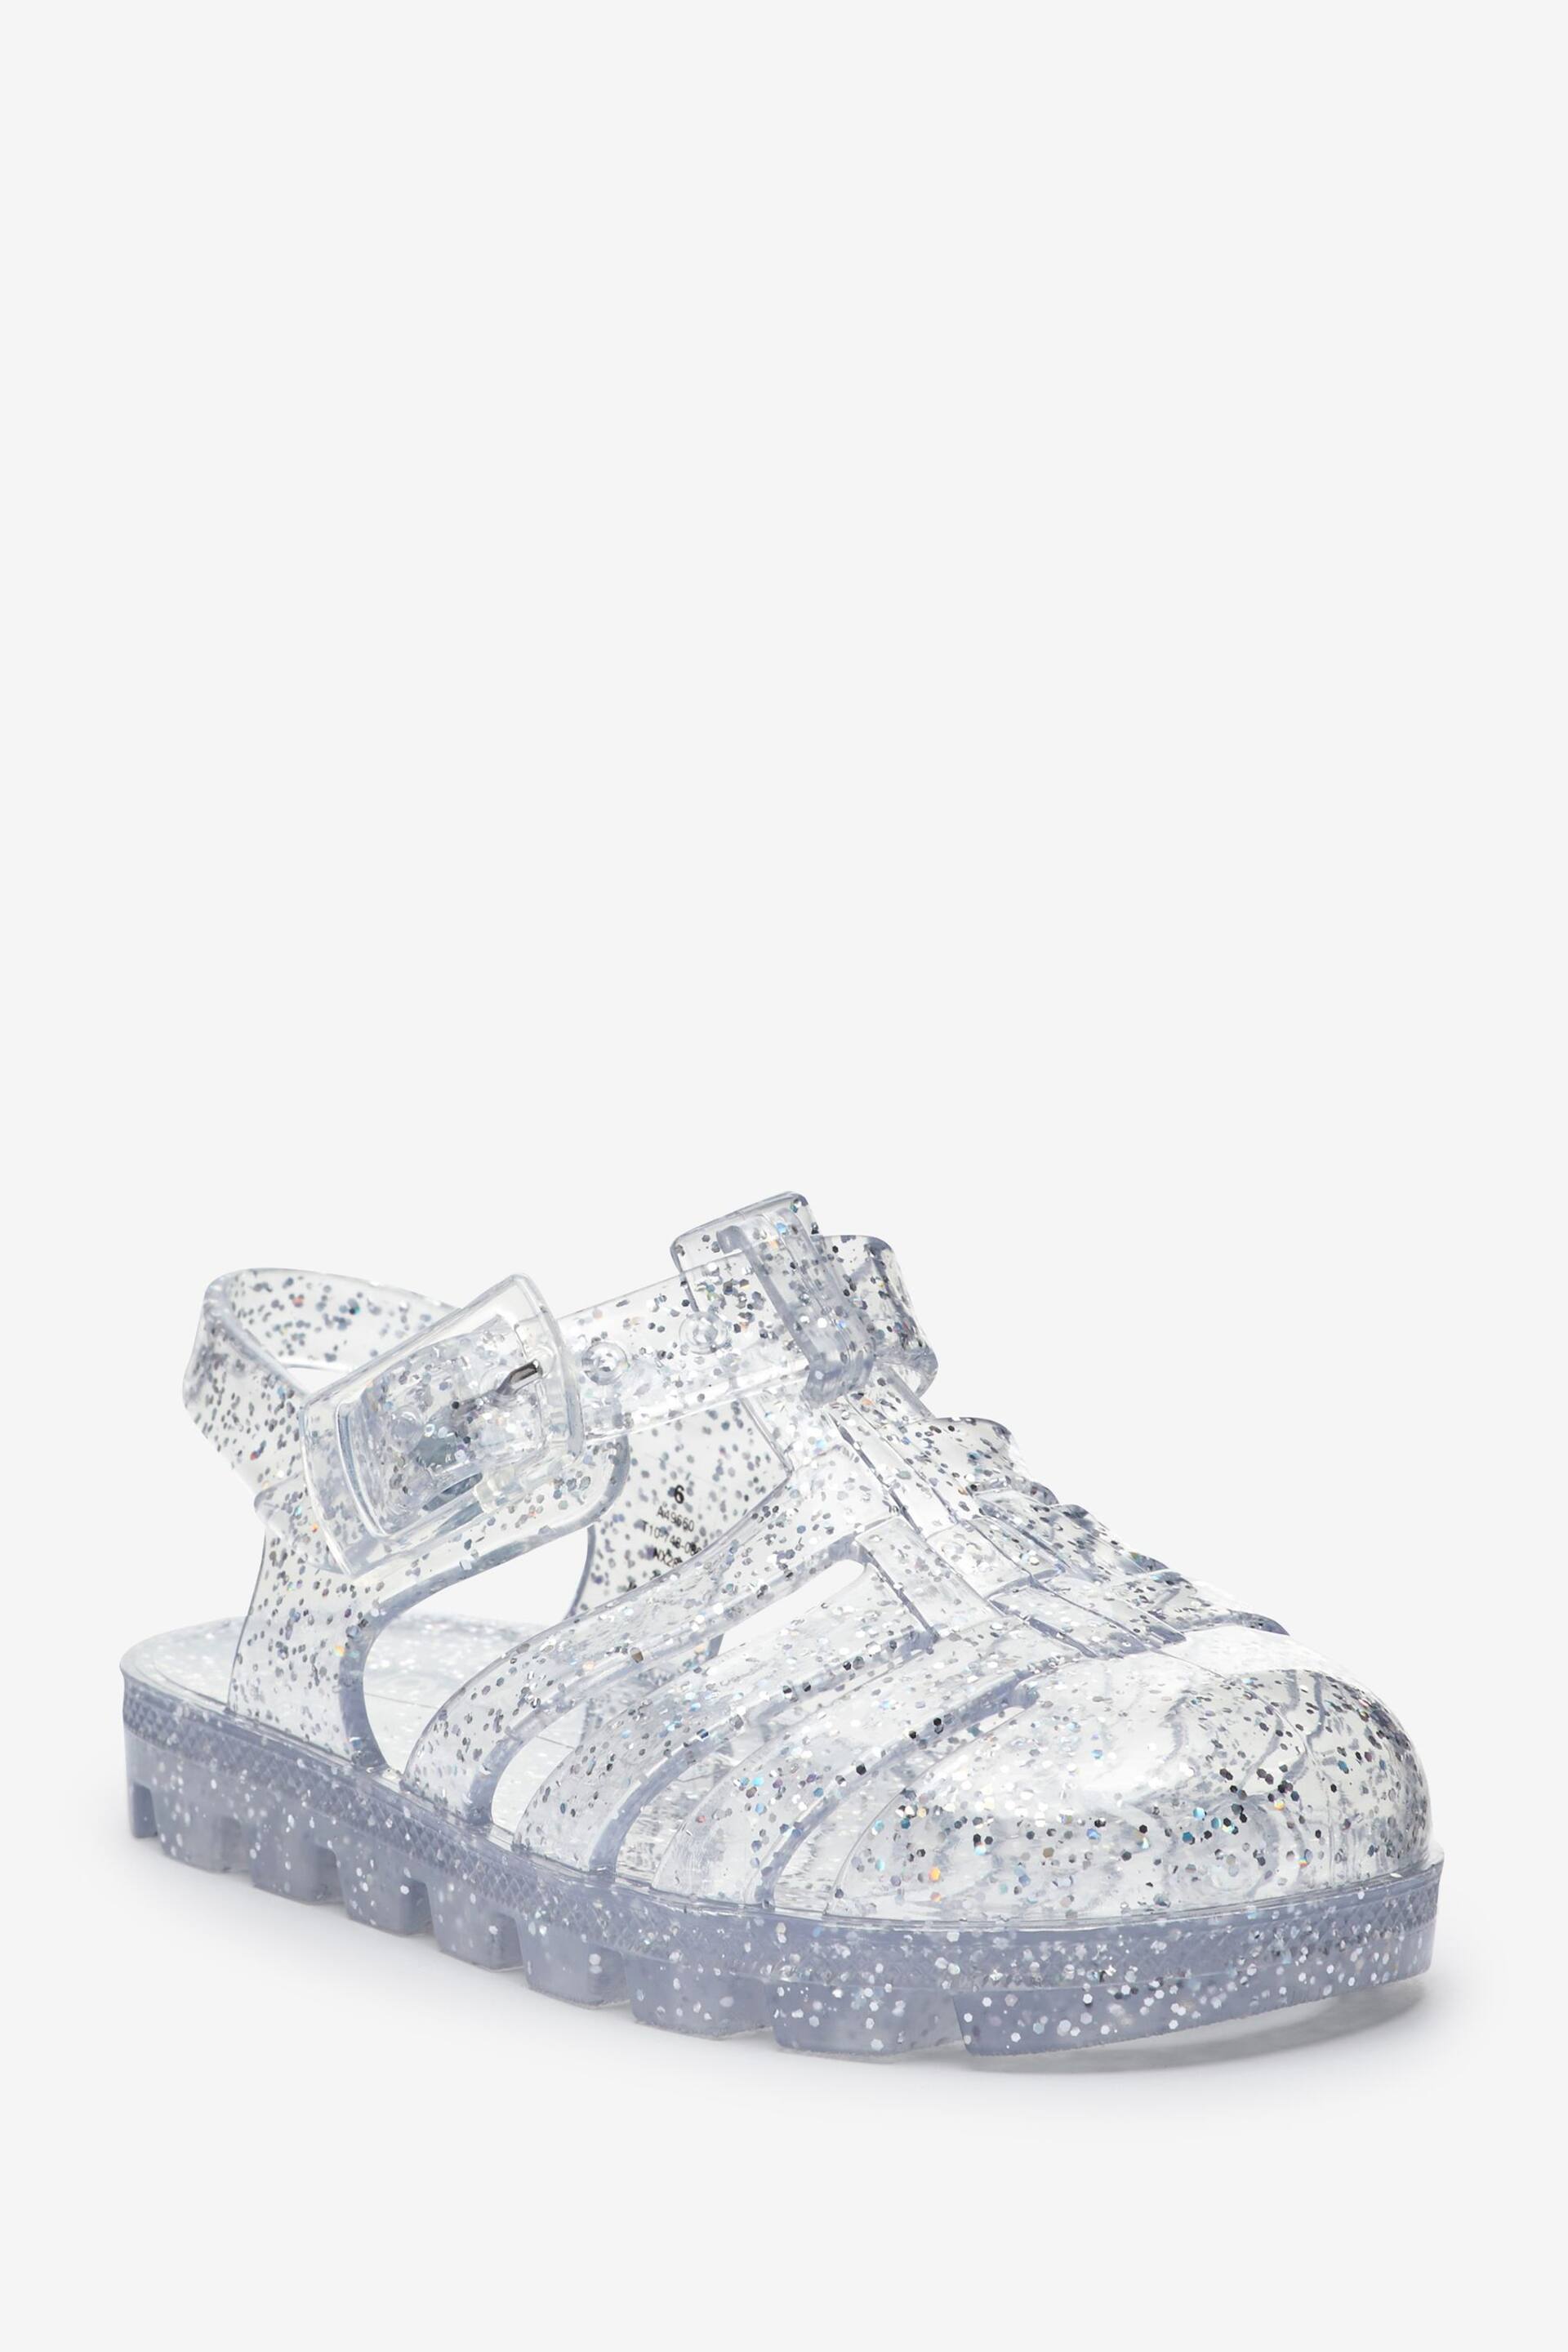 Silver Glitter Jelly Sandals - Image 2 of 4